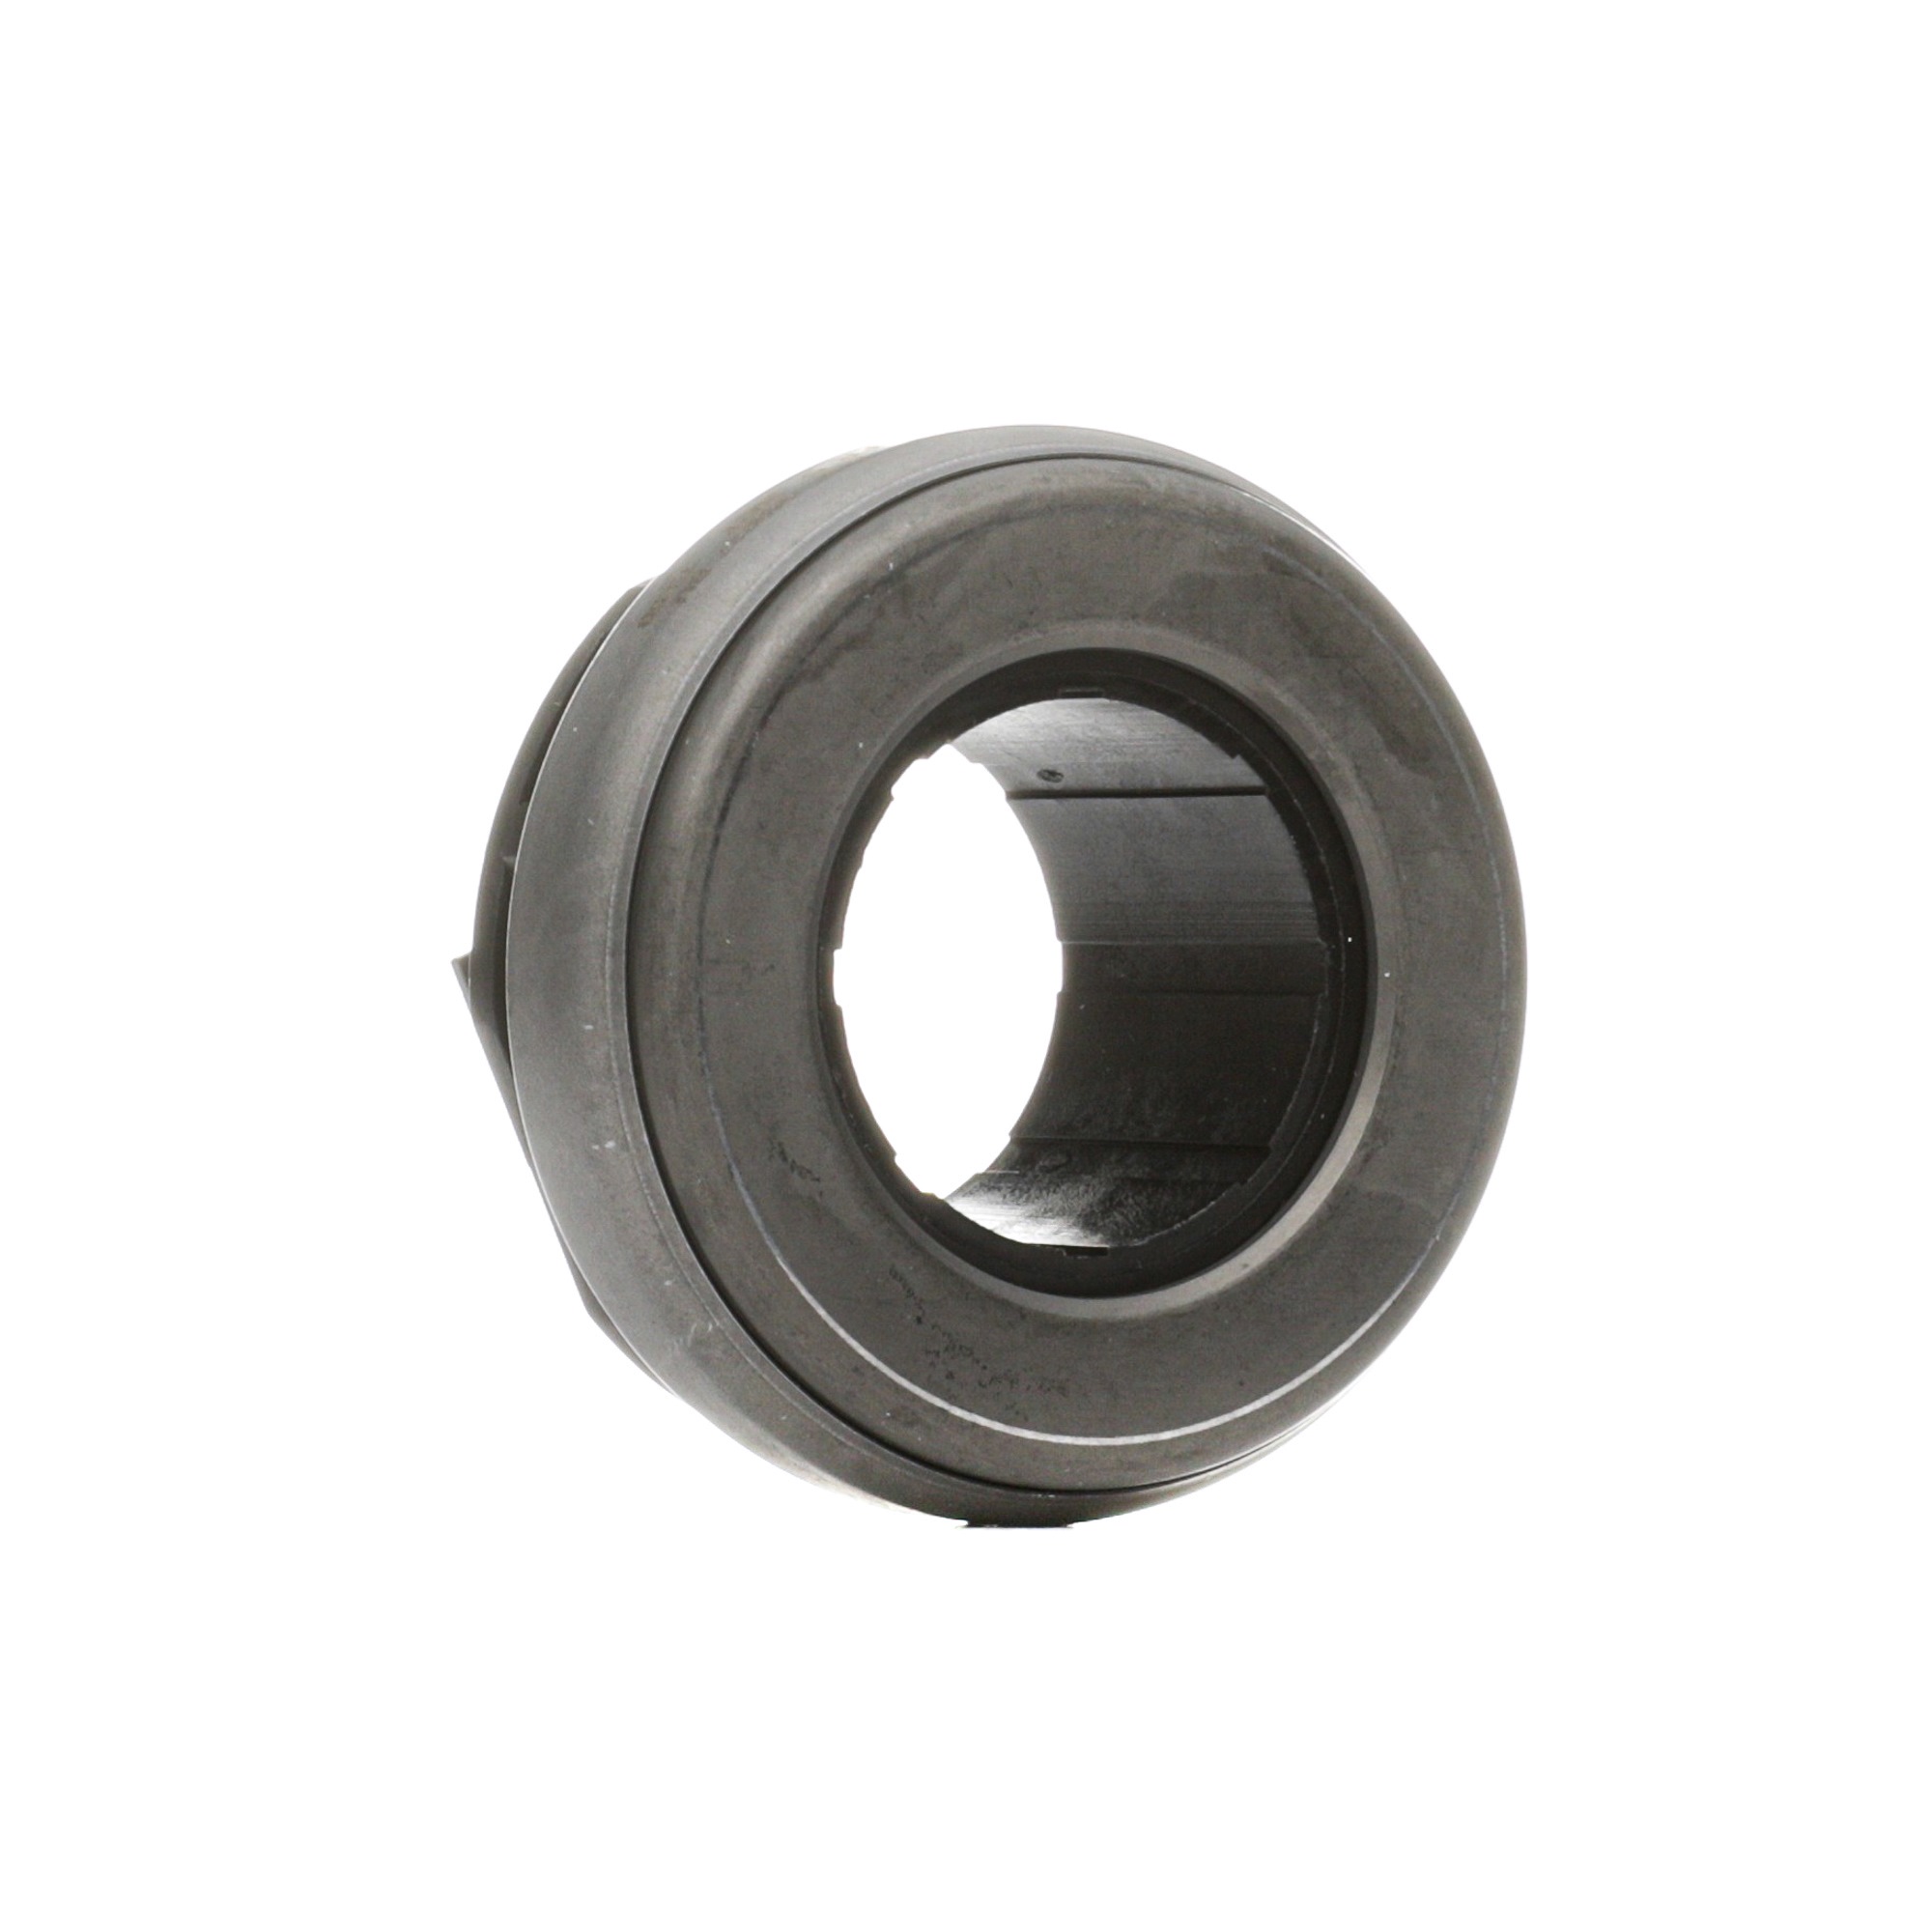 Image of SKF Clutch Release Bearing VOLVO VKC 2065 3549391,3549881,380569 Clutch Bearing,Release Bearing,Releaser